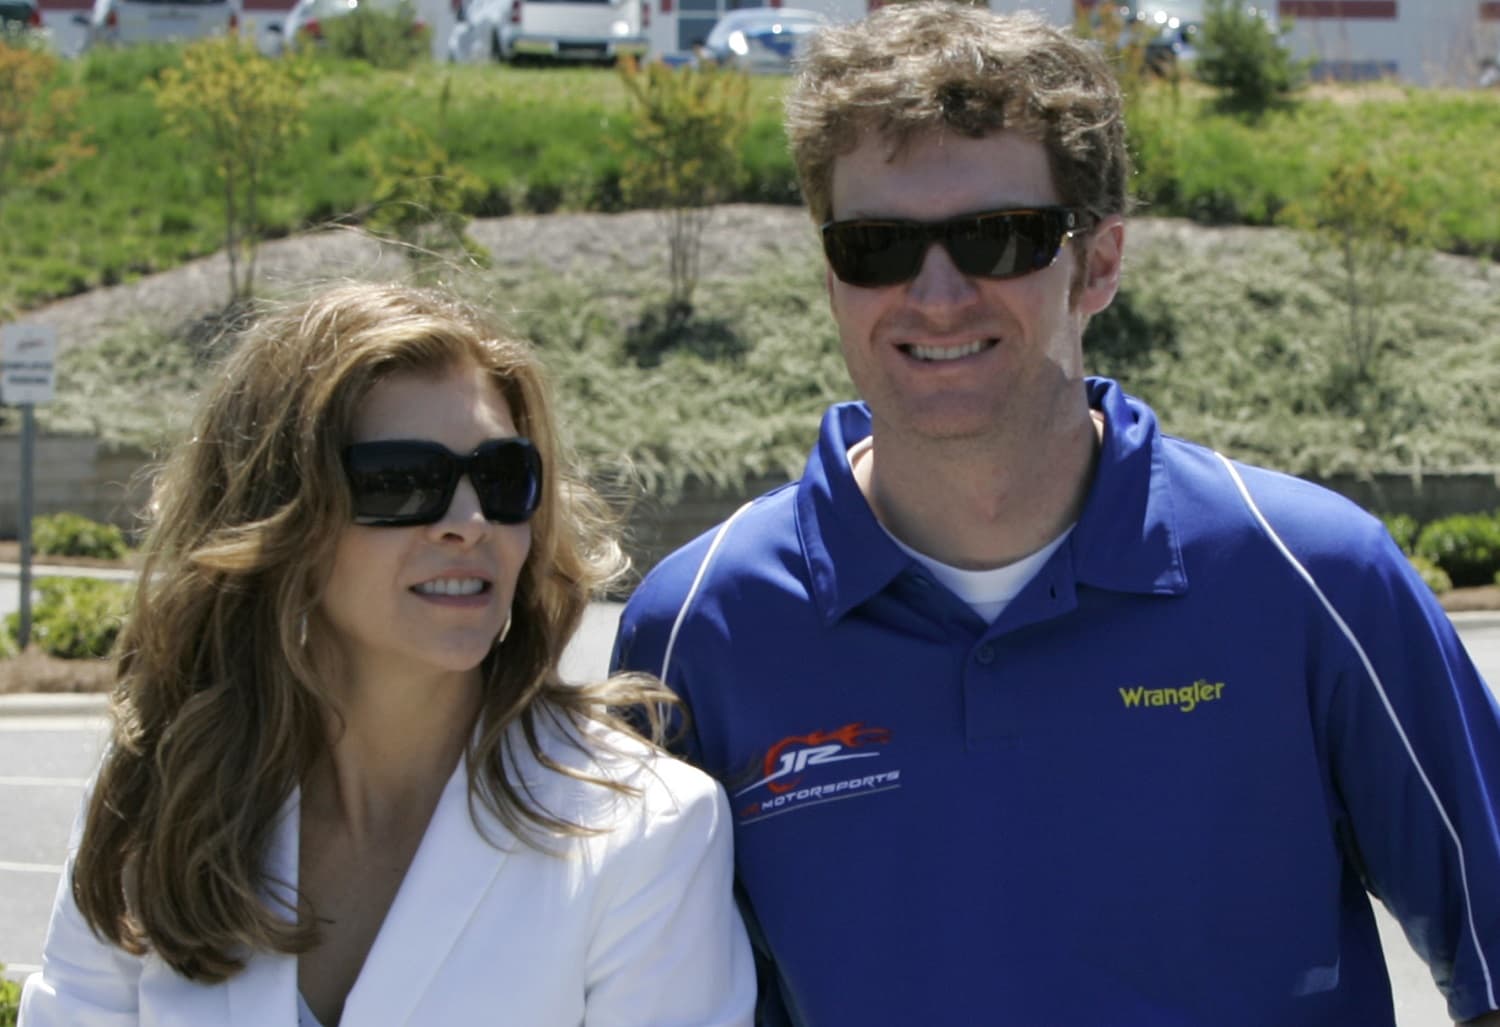 Teresa Earnhardt and Dale Earnhardt Jr., seen unveiling the No. 3 Wrangler car he drove in the 2010 Nationwide race in Daytona, fought over the future of DEI.